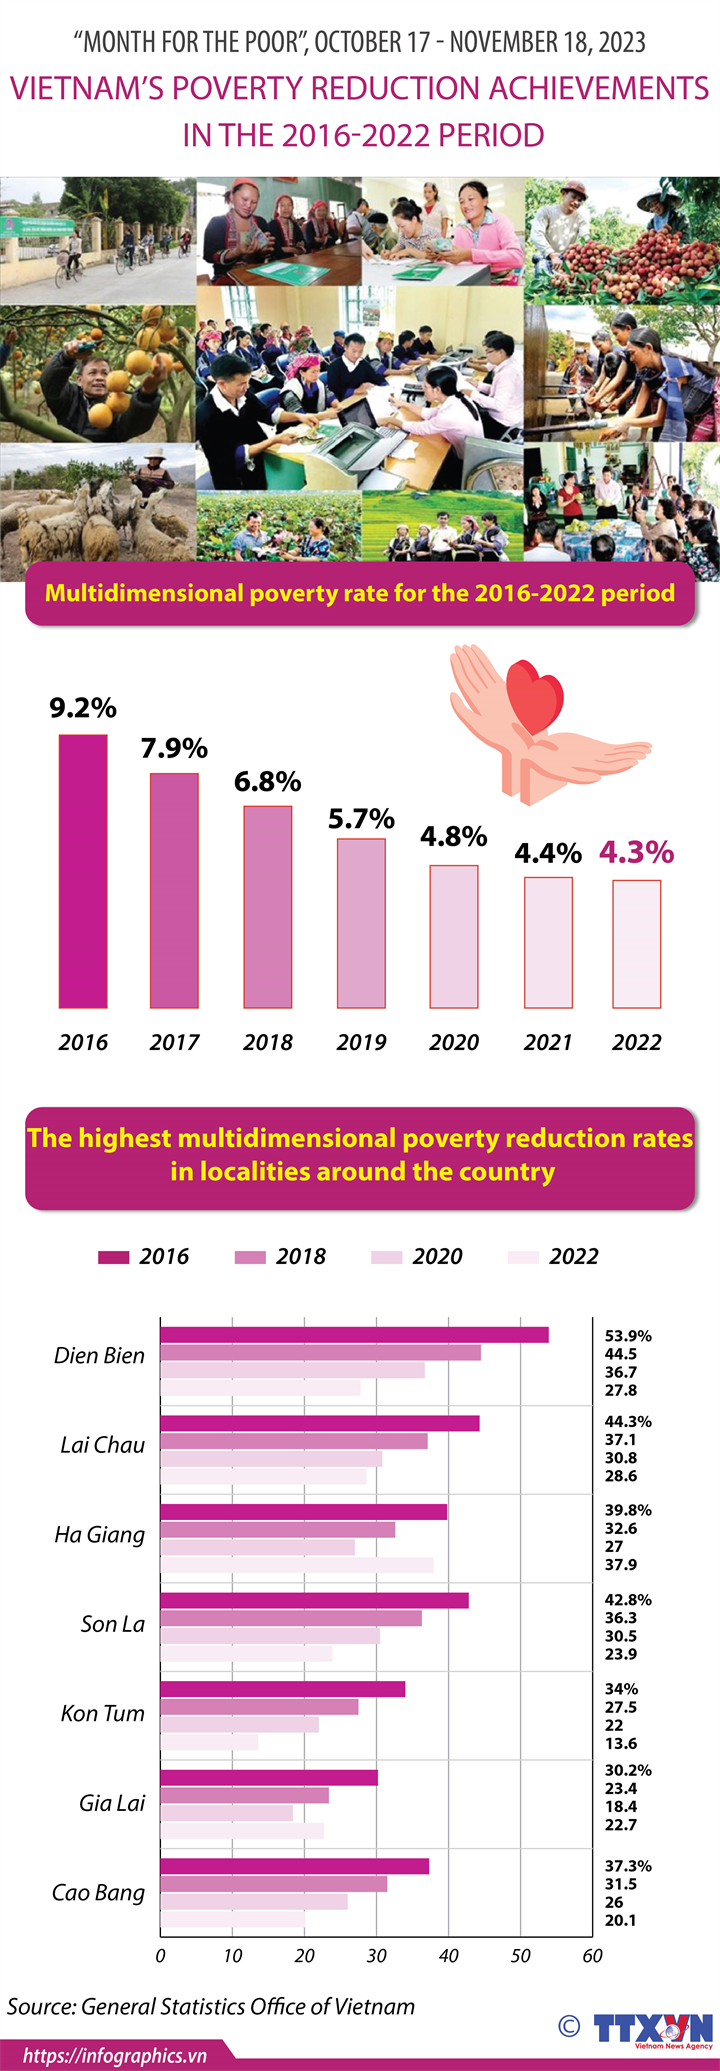 Vietnam's poverty reduction achievements in the 2016-2022 period